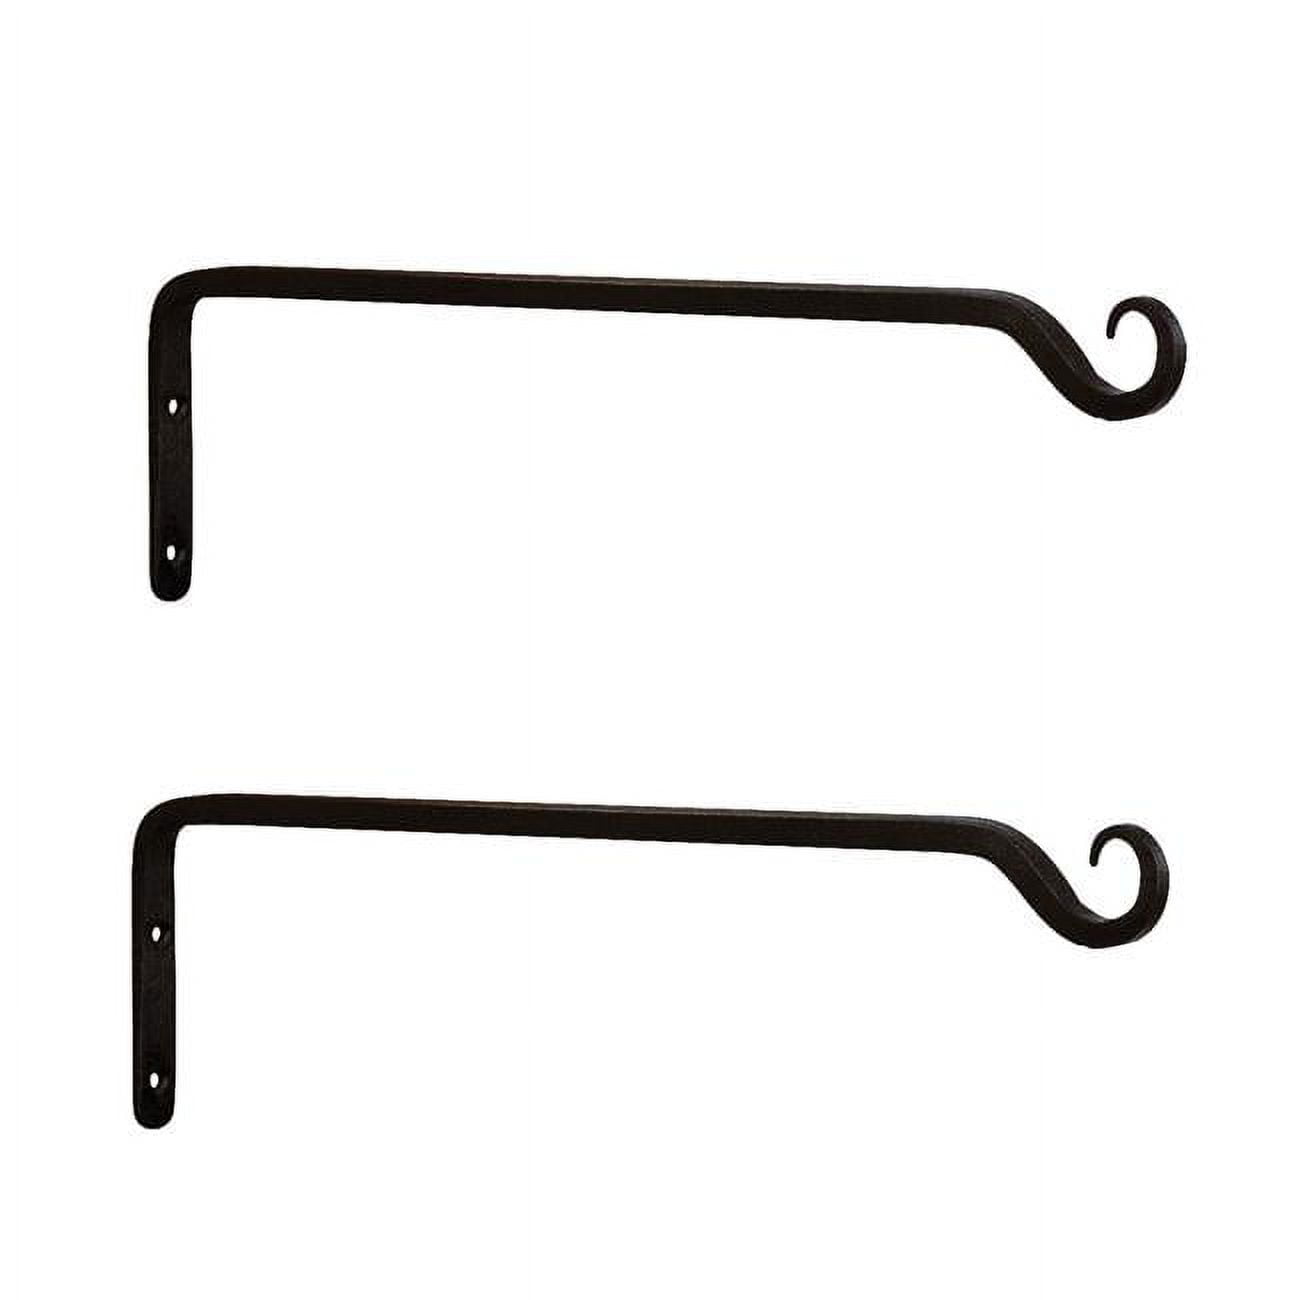 Picture of ACHLA Designs TSH-10-2 15 in. Straight Upcurled Bracket, Black - Pack of 2